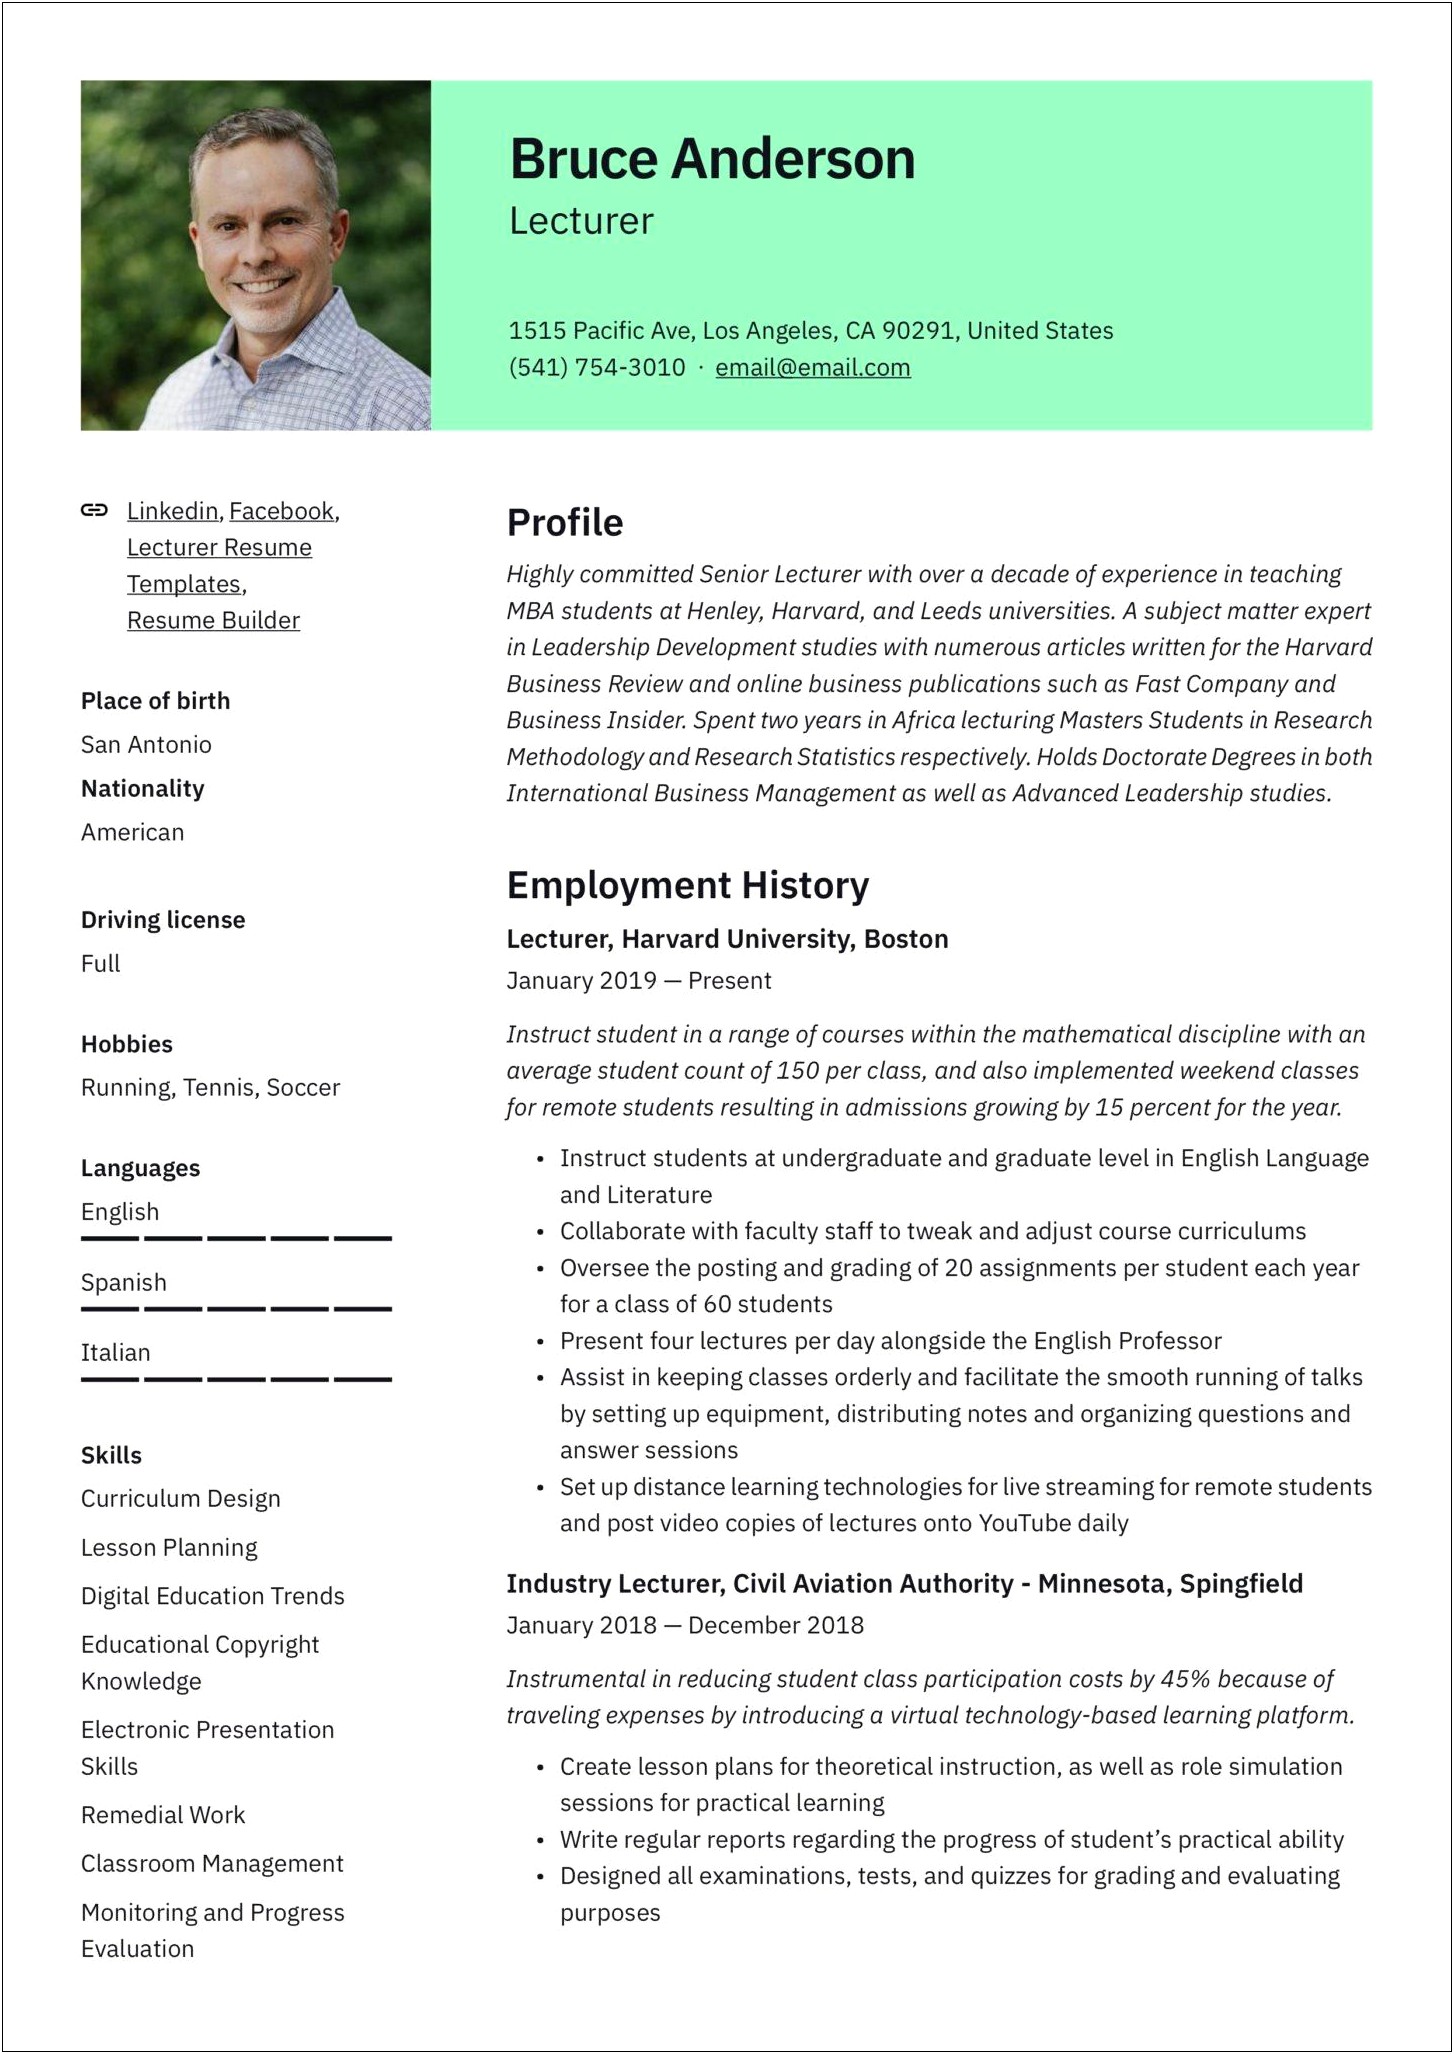 Resume Strength In Classroom Management